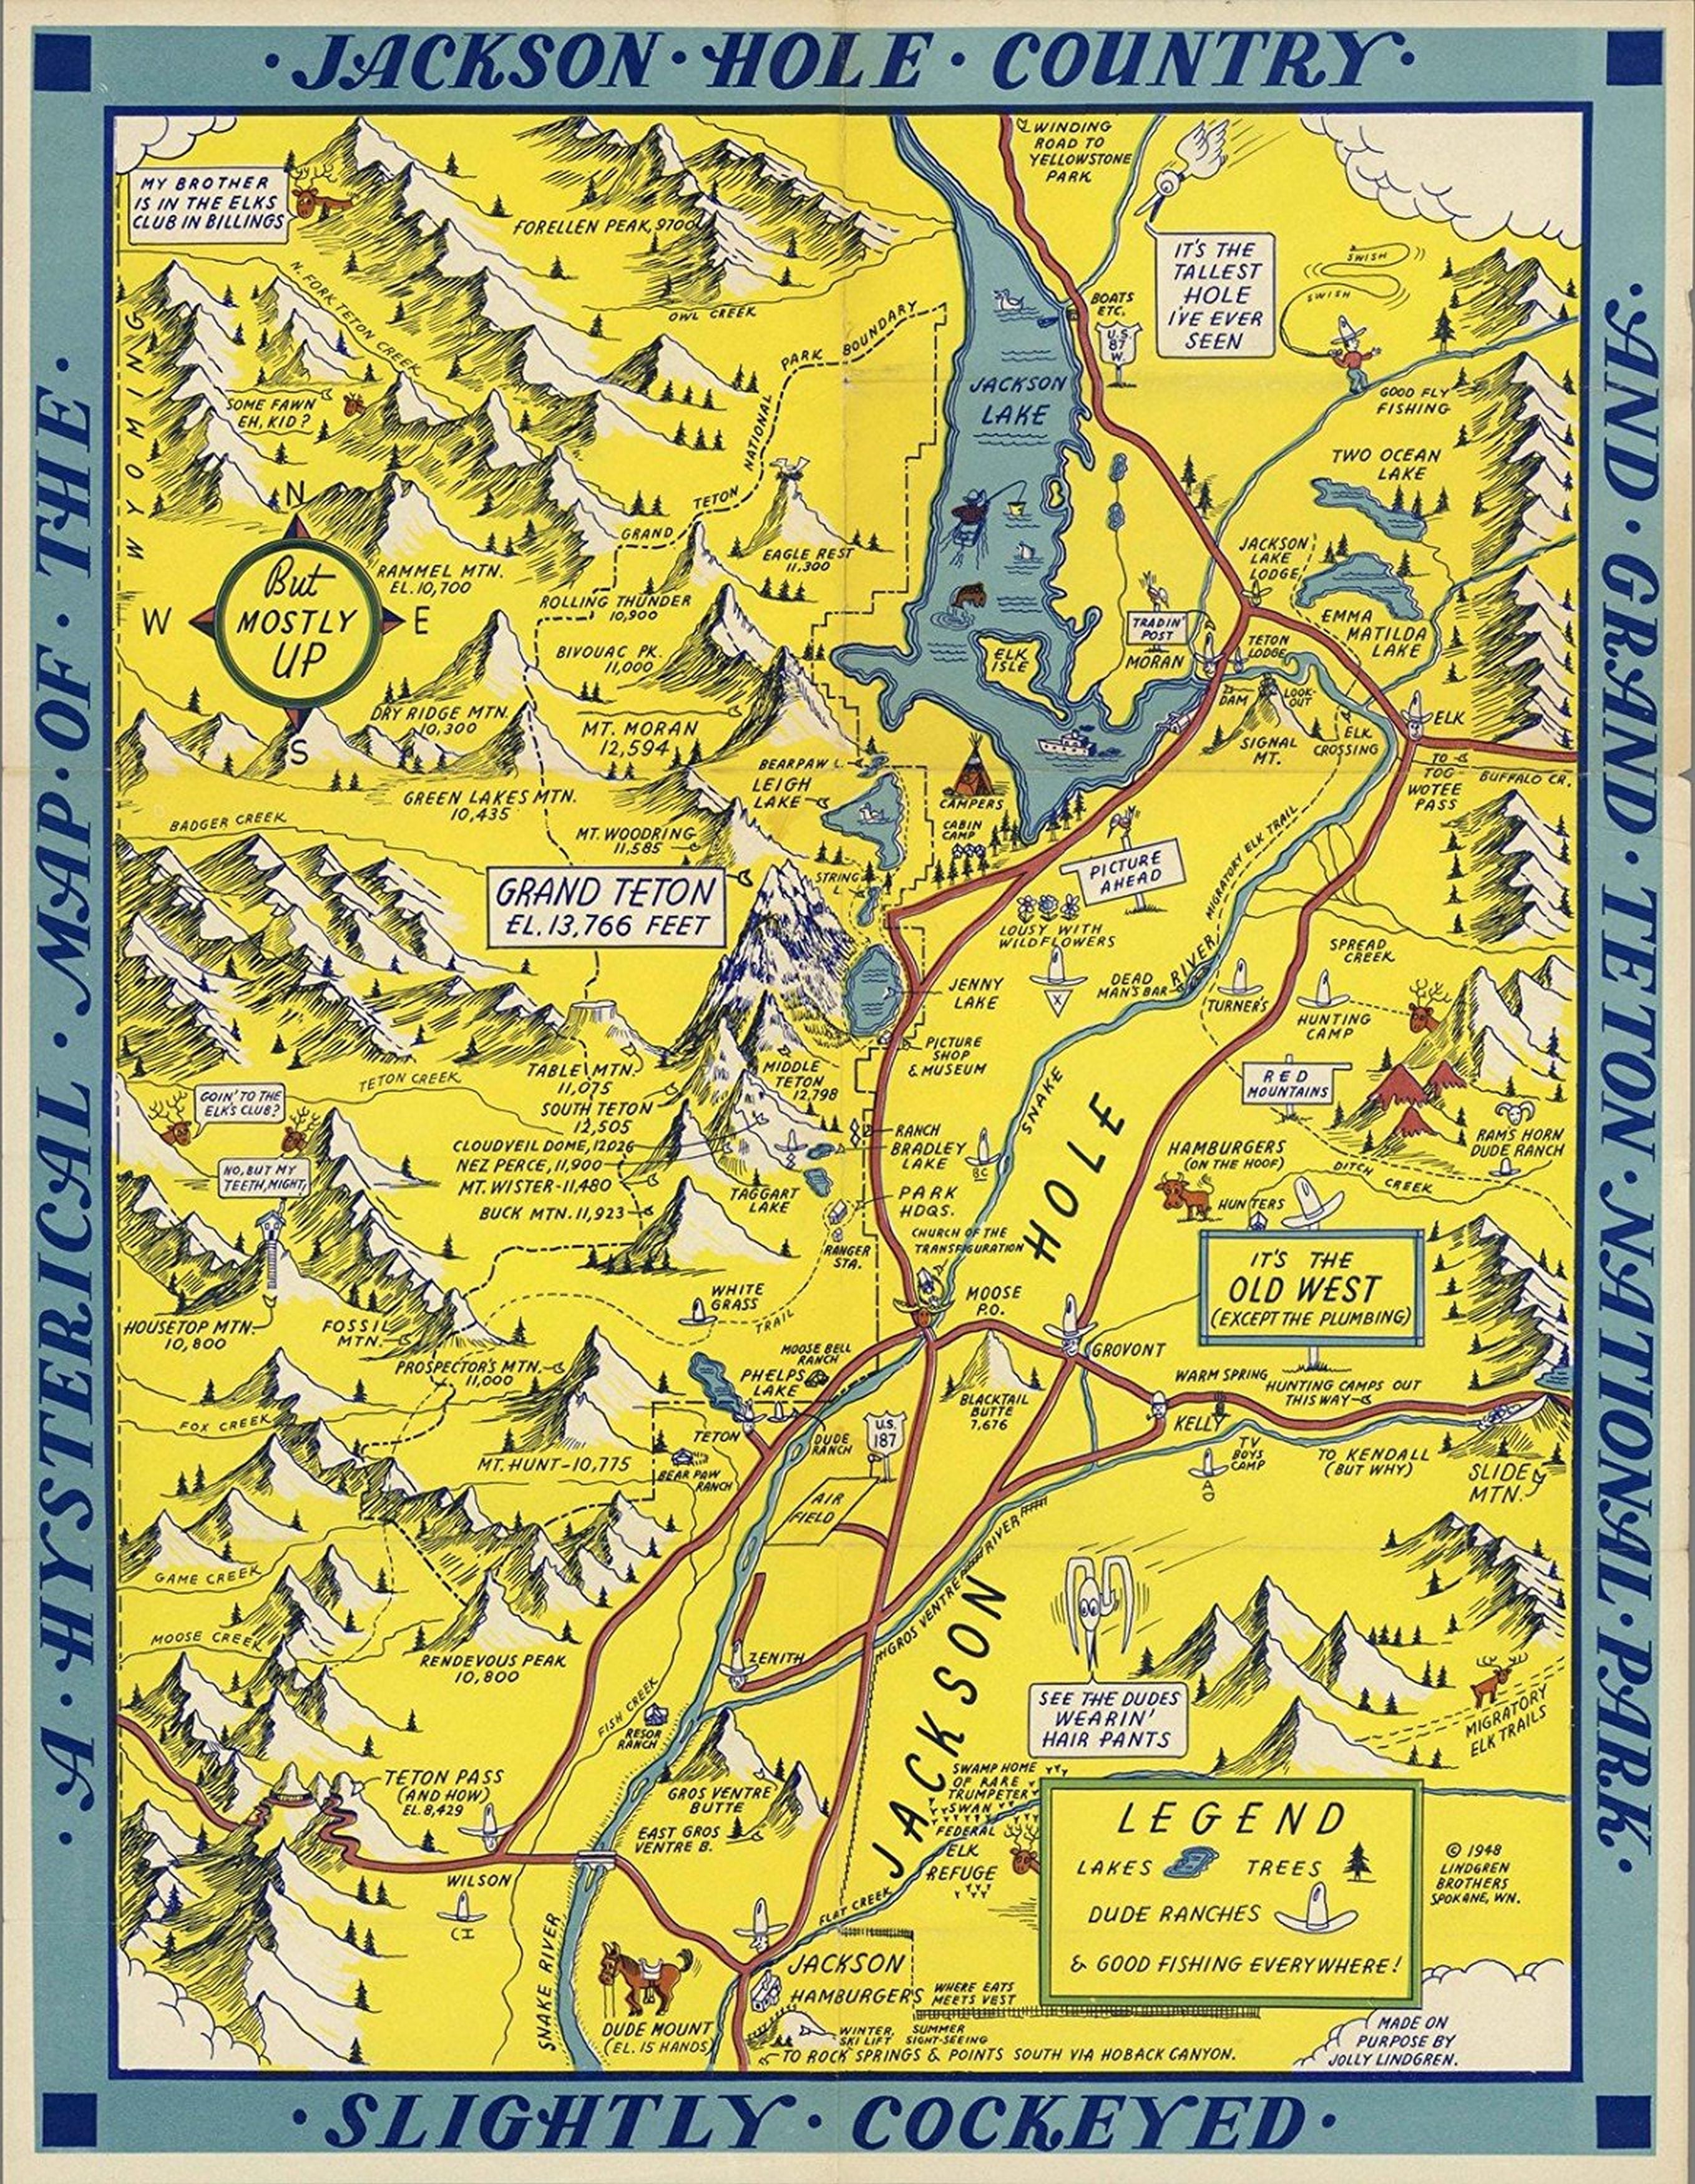 A hysterical map of the Jackson Hole country and Grand Teton National Park: slightly cockeyed. 1949 Lindgren Brothers, Spokane, WN., A hysterical map of the Jackson Hole country and Grand Teton National Park: slightly cockeyed. 1948 Lindgren Brothers, Sp